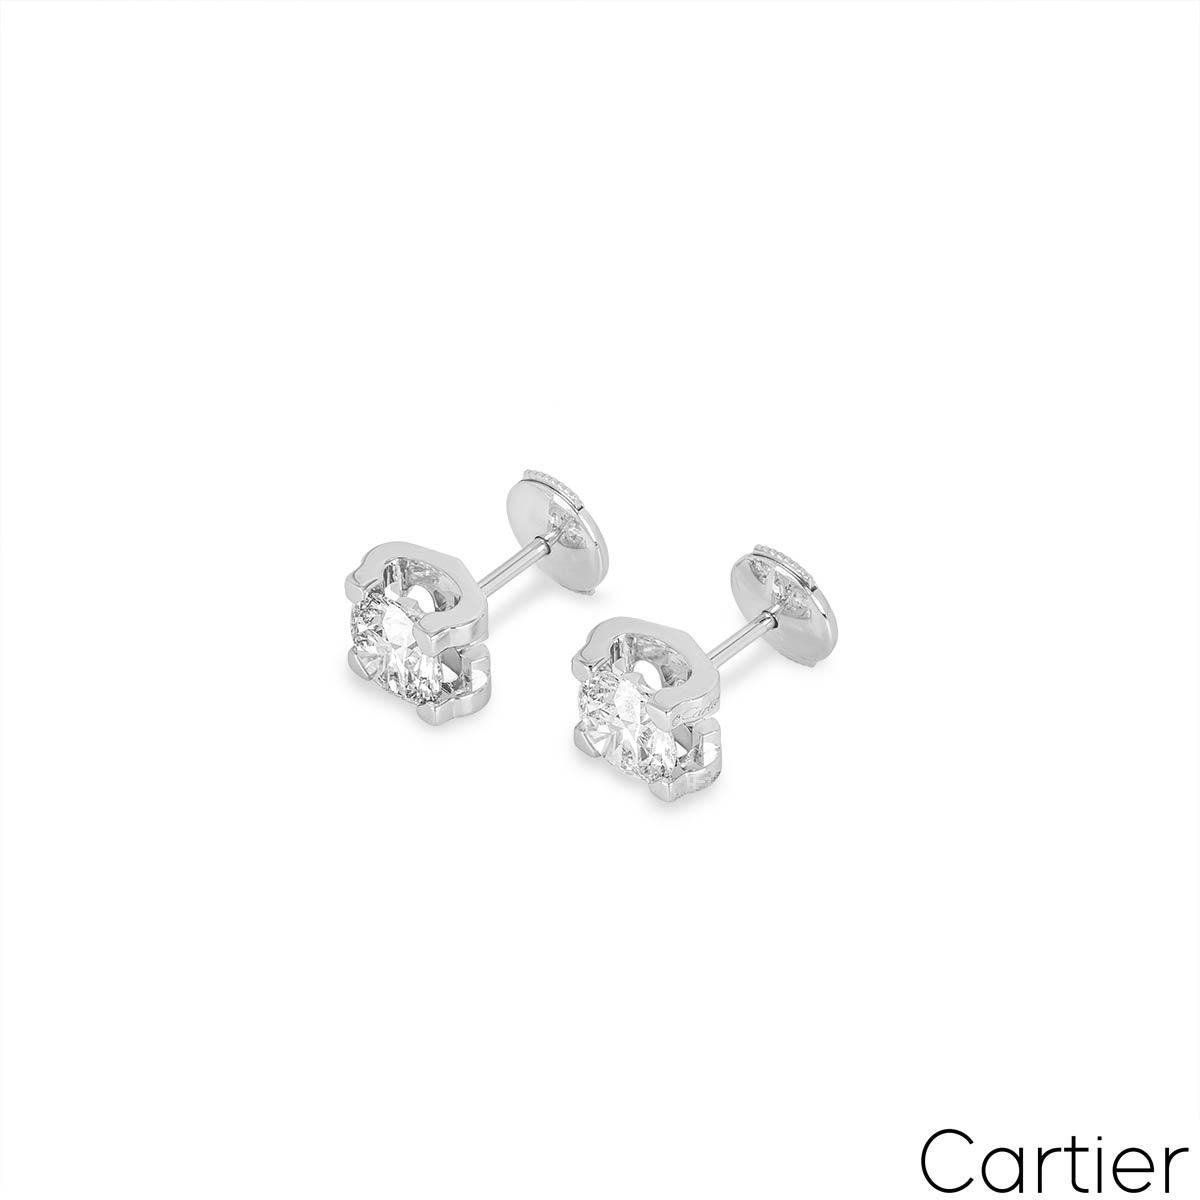 An exquisite pair of white gold diamond earrings by Cartier from the C de Cartier collection. The earrings feature a C design on both sides that securely encase the diamonds to the centre. Each earring is set with a round brilliant cut diamond